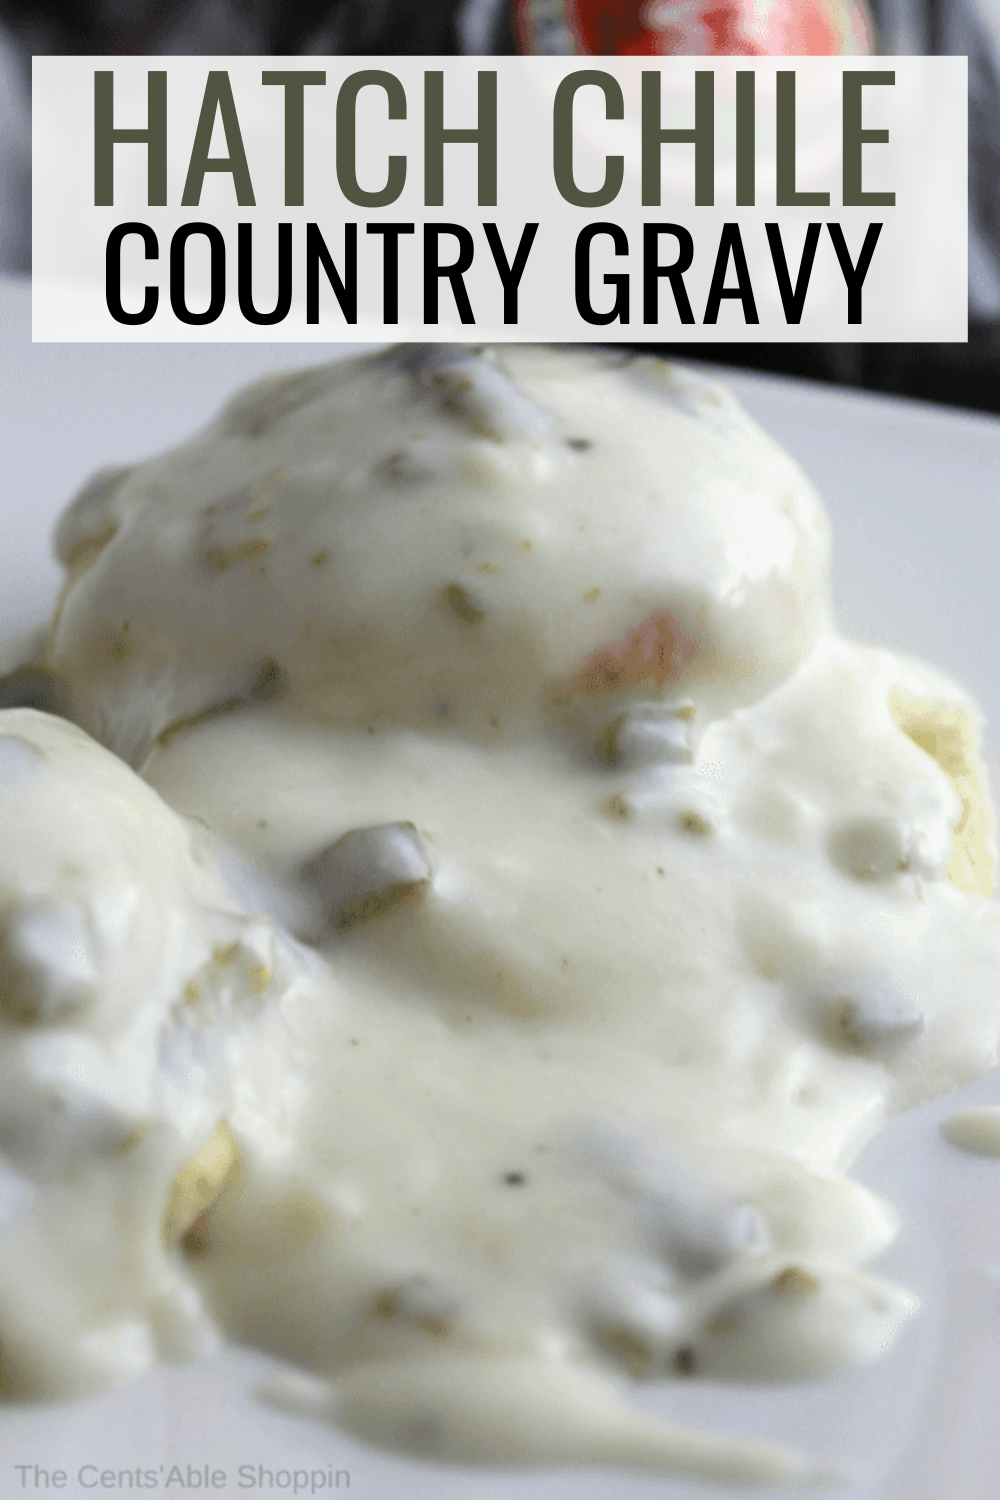 A thick and spicy Hatch Chile country gravy speckled with green chiles that's delicious served on flaky country biscuits, chicken or even turkey!